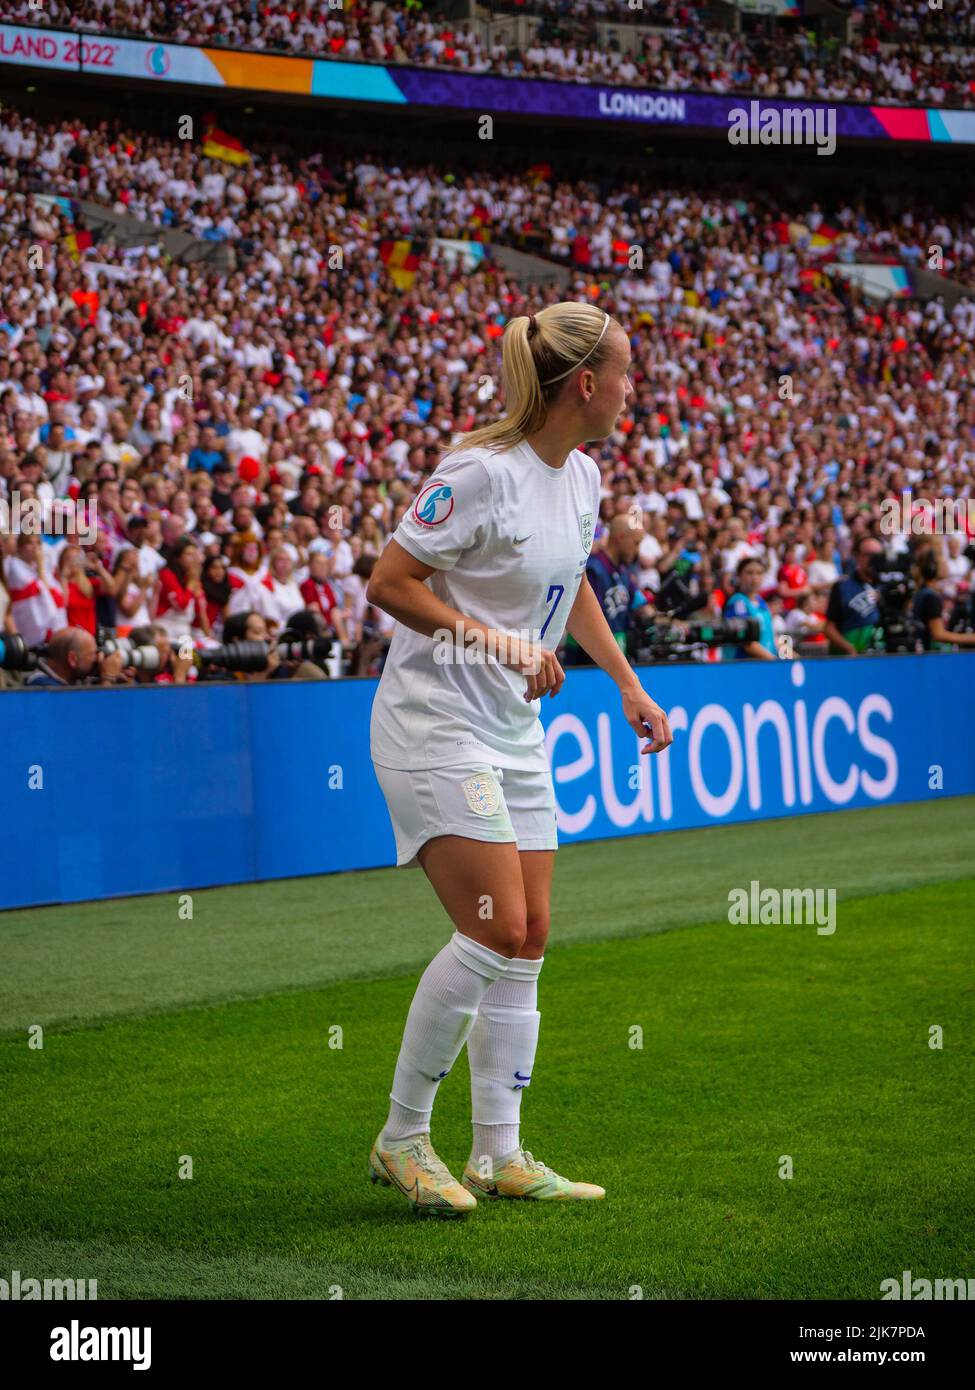 London, UK. 31st July, 2022. Beth Mead (7 England) lines up a corner during the UEFA Womens Euro 2022 Final football match between England and Germany at Wembley Stadium, England. (Foto: Claire Jeffrey/Sports Press Photo/C - ONE HOUR DEADLINE - ONLY ACTIVATE FTP IF IMAGES LESS THAN ONE HOUR OLD - Alamy) Credit: SPP Sport Press Photo. /Alamy Live News Stock Photo